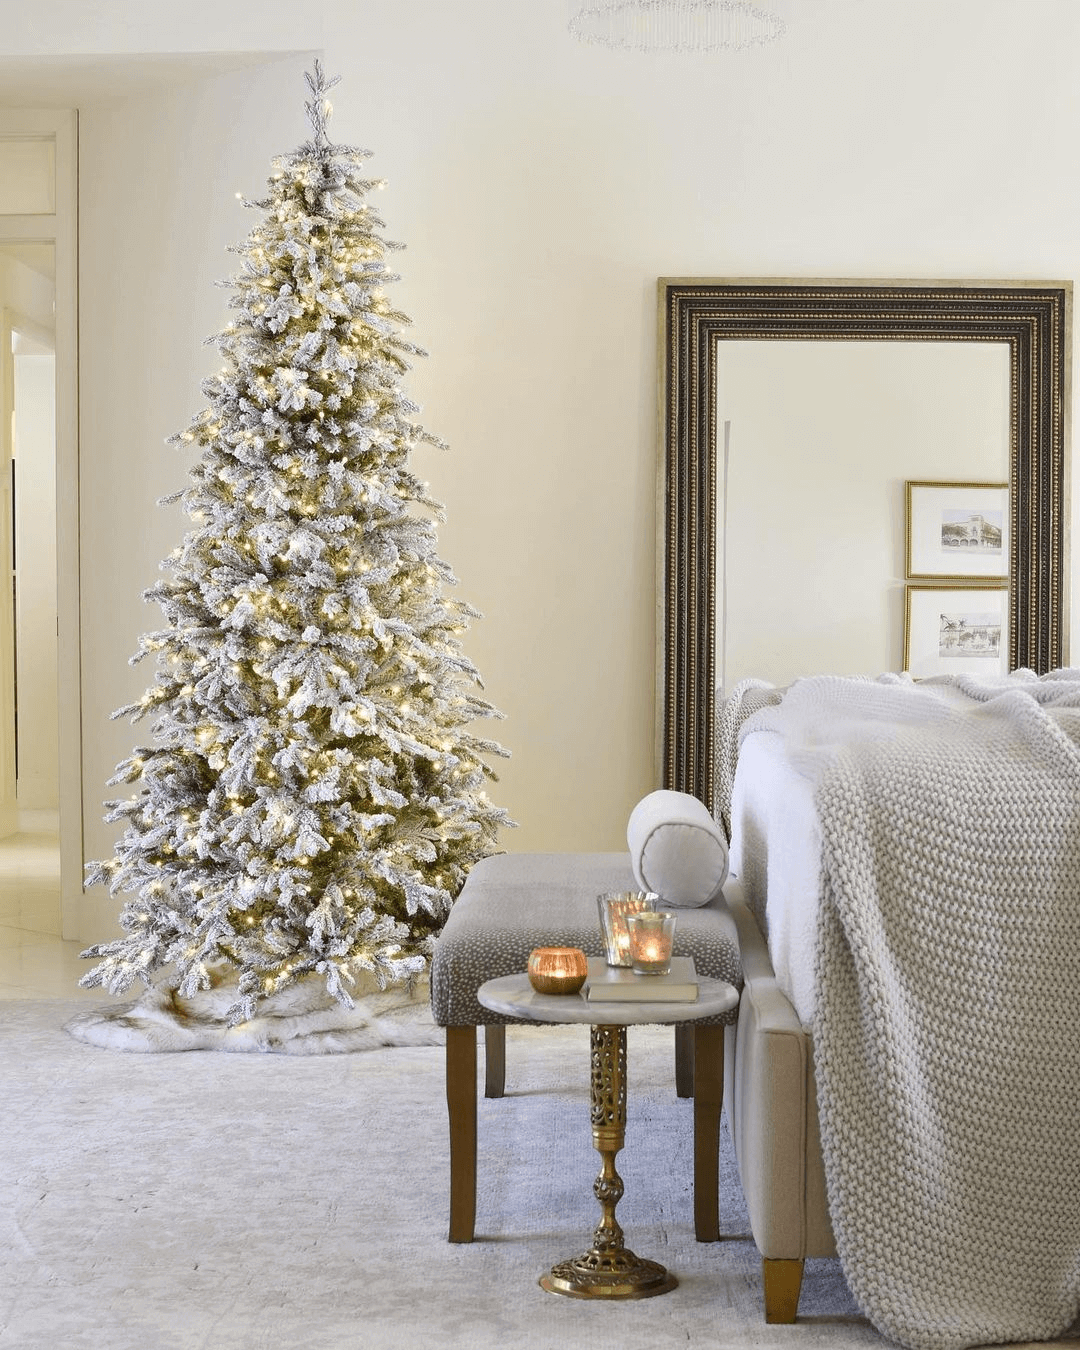 King of Christmas 10' Queen Flock® Slim Artificial Christmas Tree 1000 Warm White LED Lights